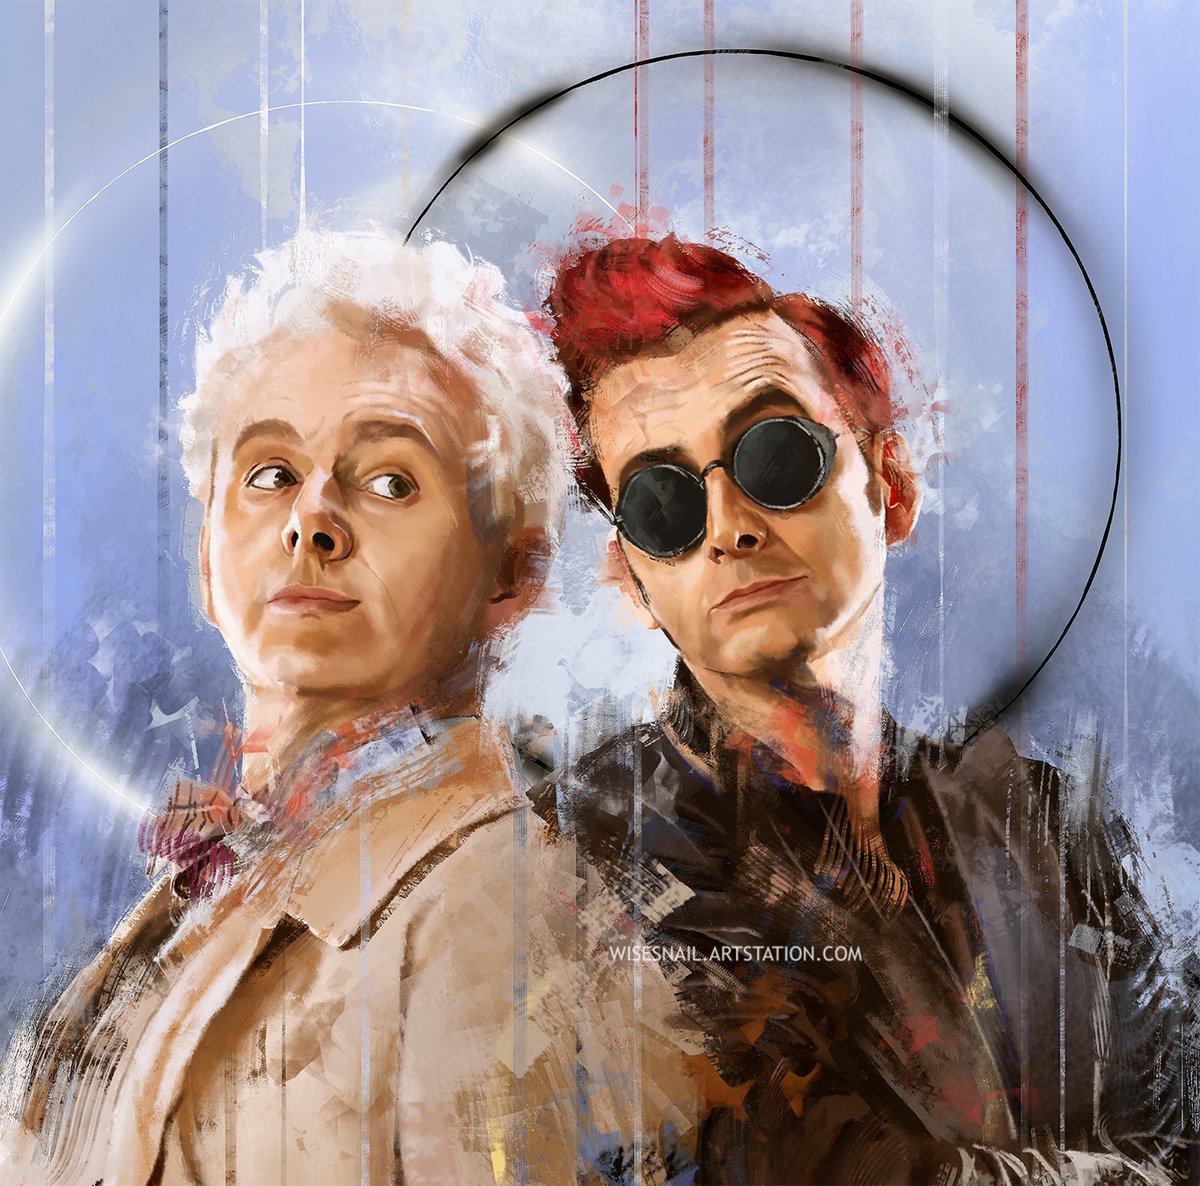 I have to keep busy while I wait for season 2 <;

#Aziraphale #Crowley #MichaelSheen #DavidTennant #GoodOmens #GO #GoodOmens2 #GO2 #Wisesnail #Portrait #IneffableHusbands